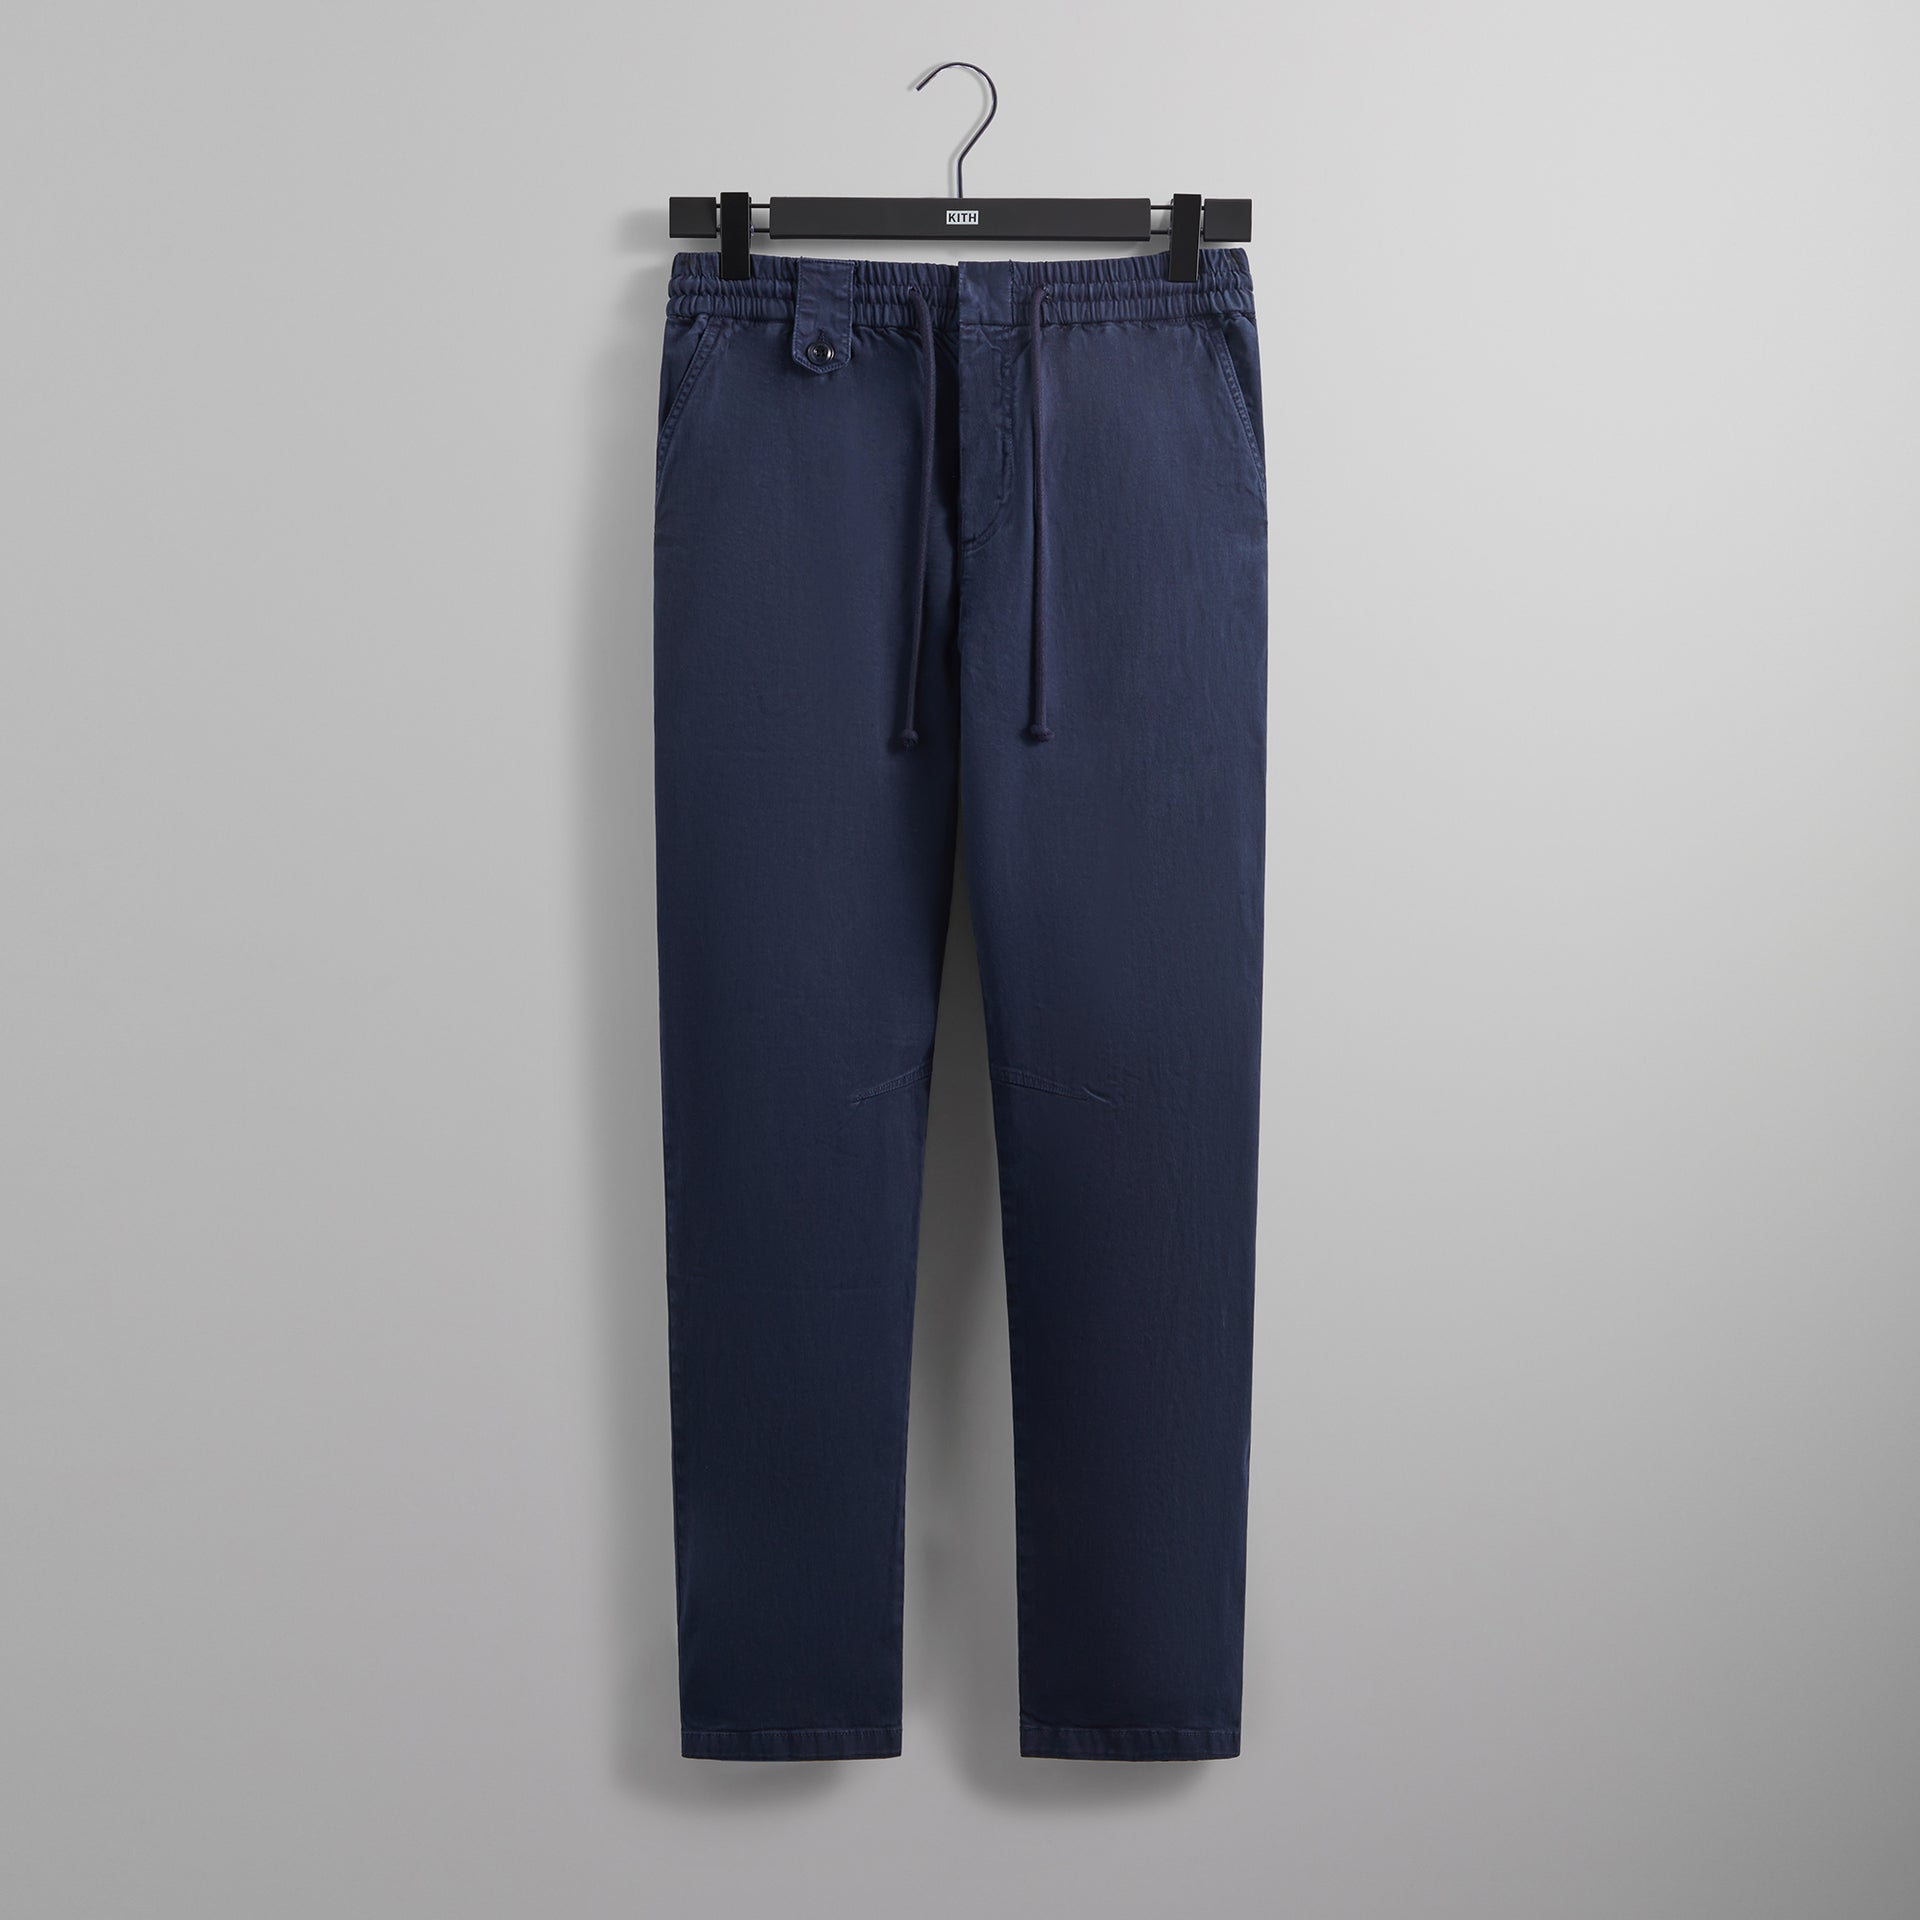 Kith Washed Cotton Wallace Pant - Nocturnal